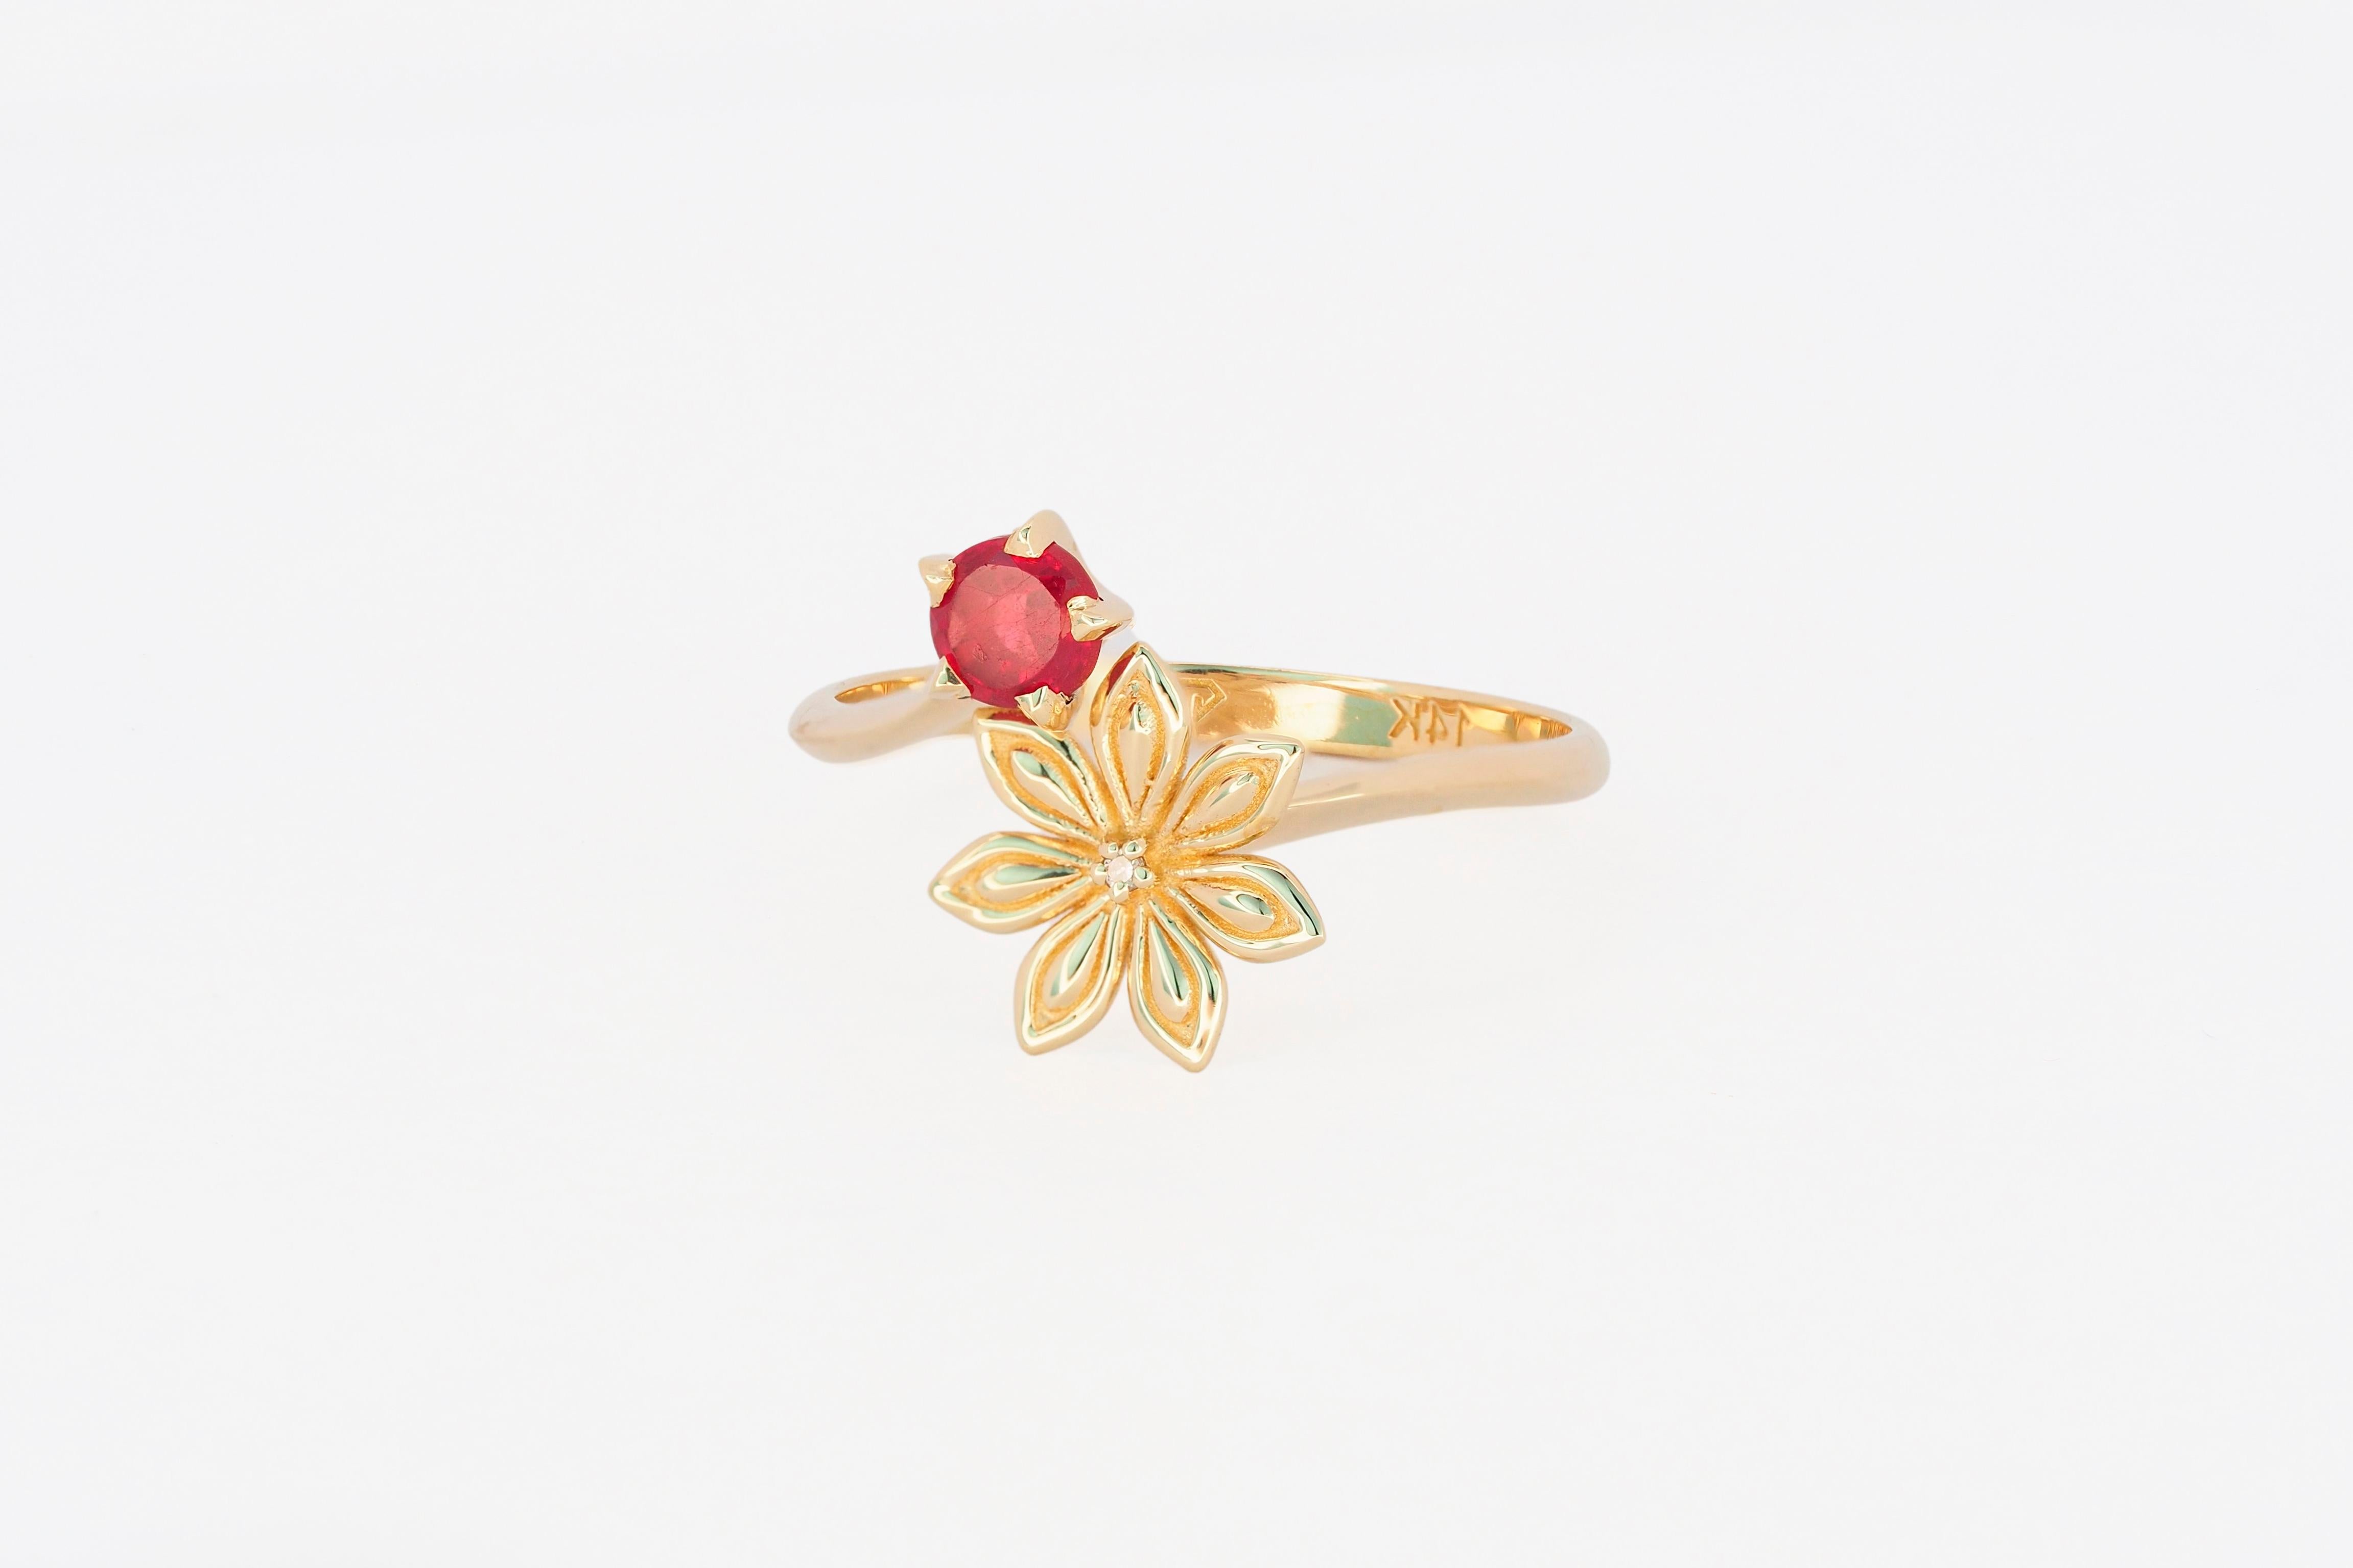 For Sale:   Ruby gold ring. 14 Karat Gold Star Anise Flower Ring. July birthstone ruby ring 4